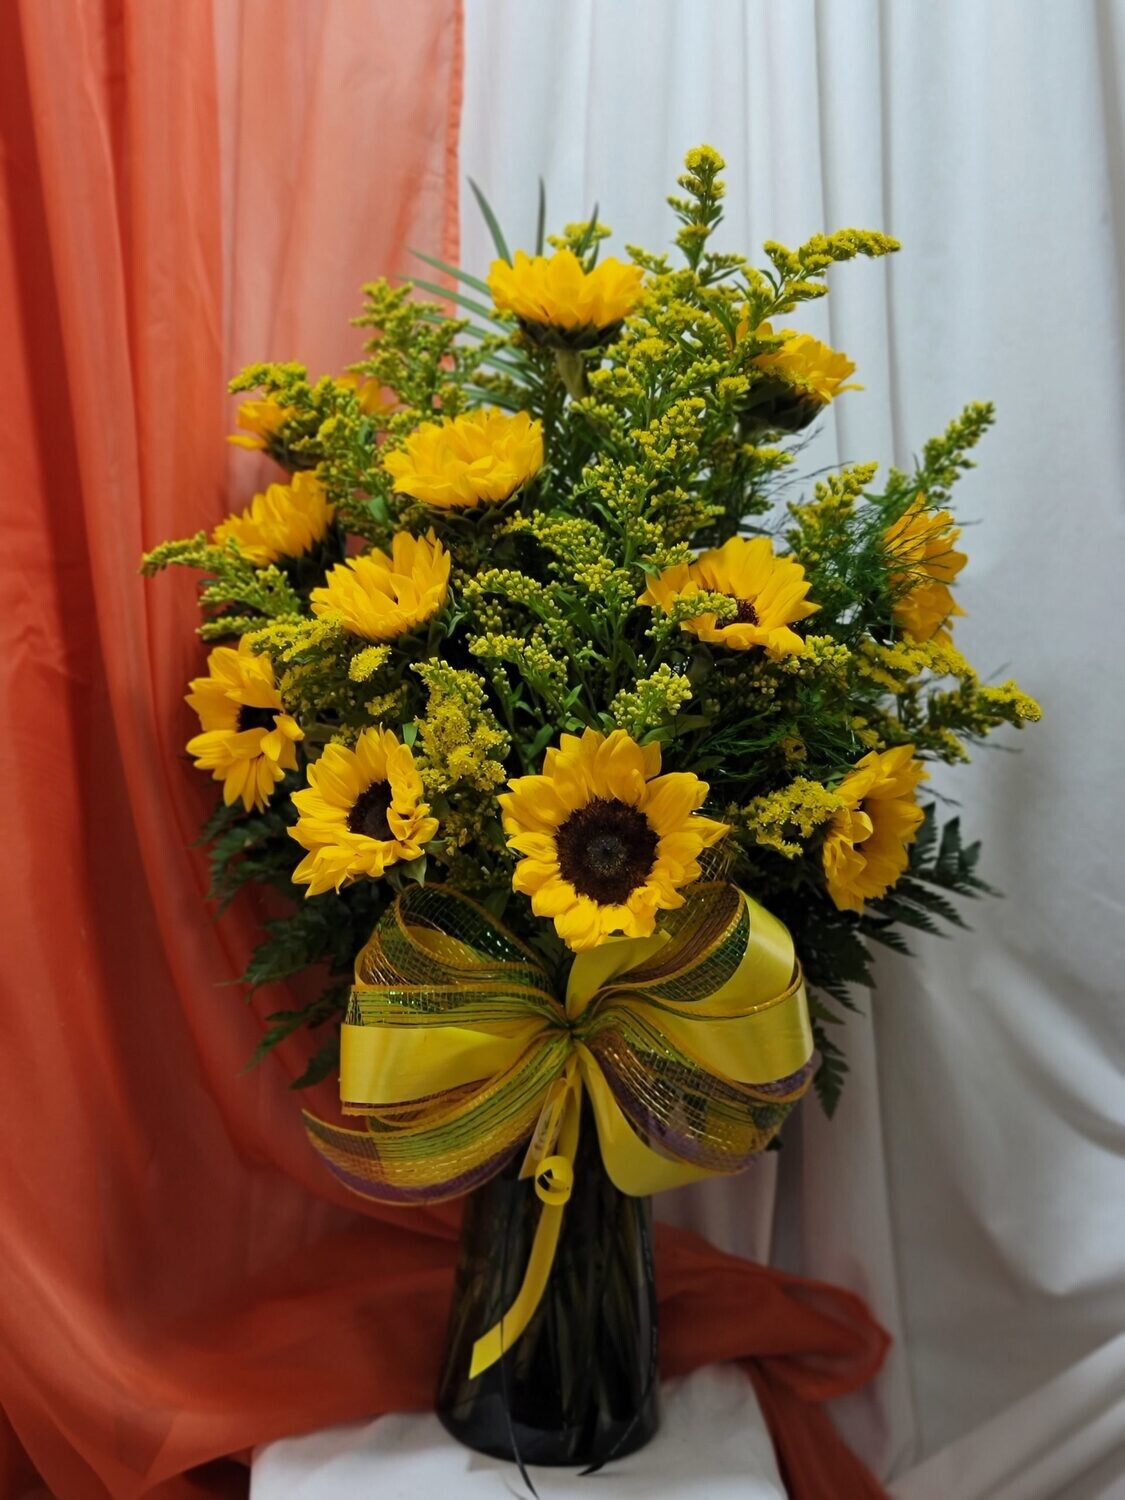 12 Sunflowers in a vase - Out of Stock